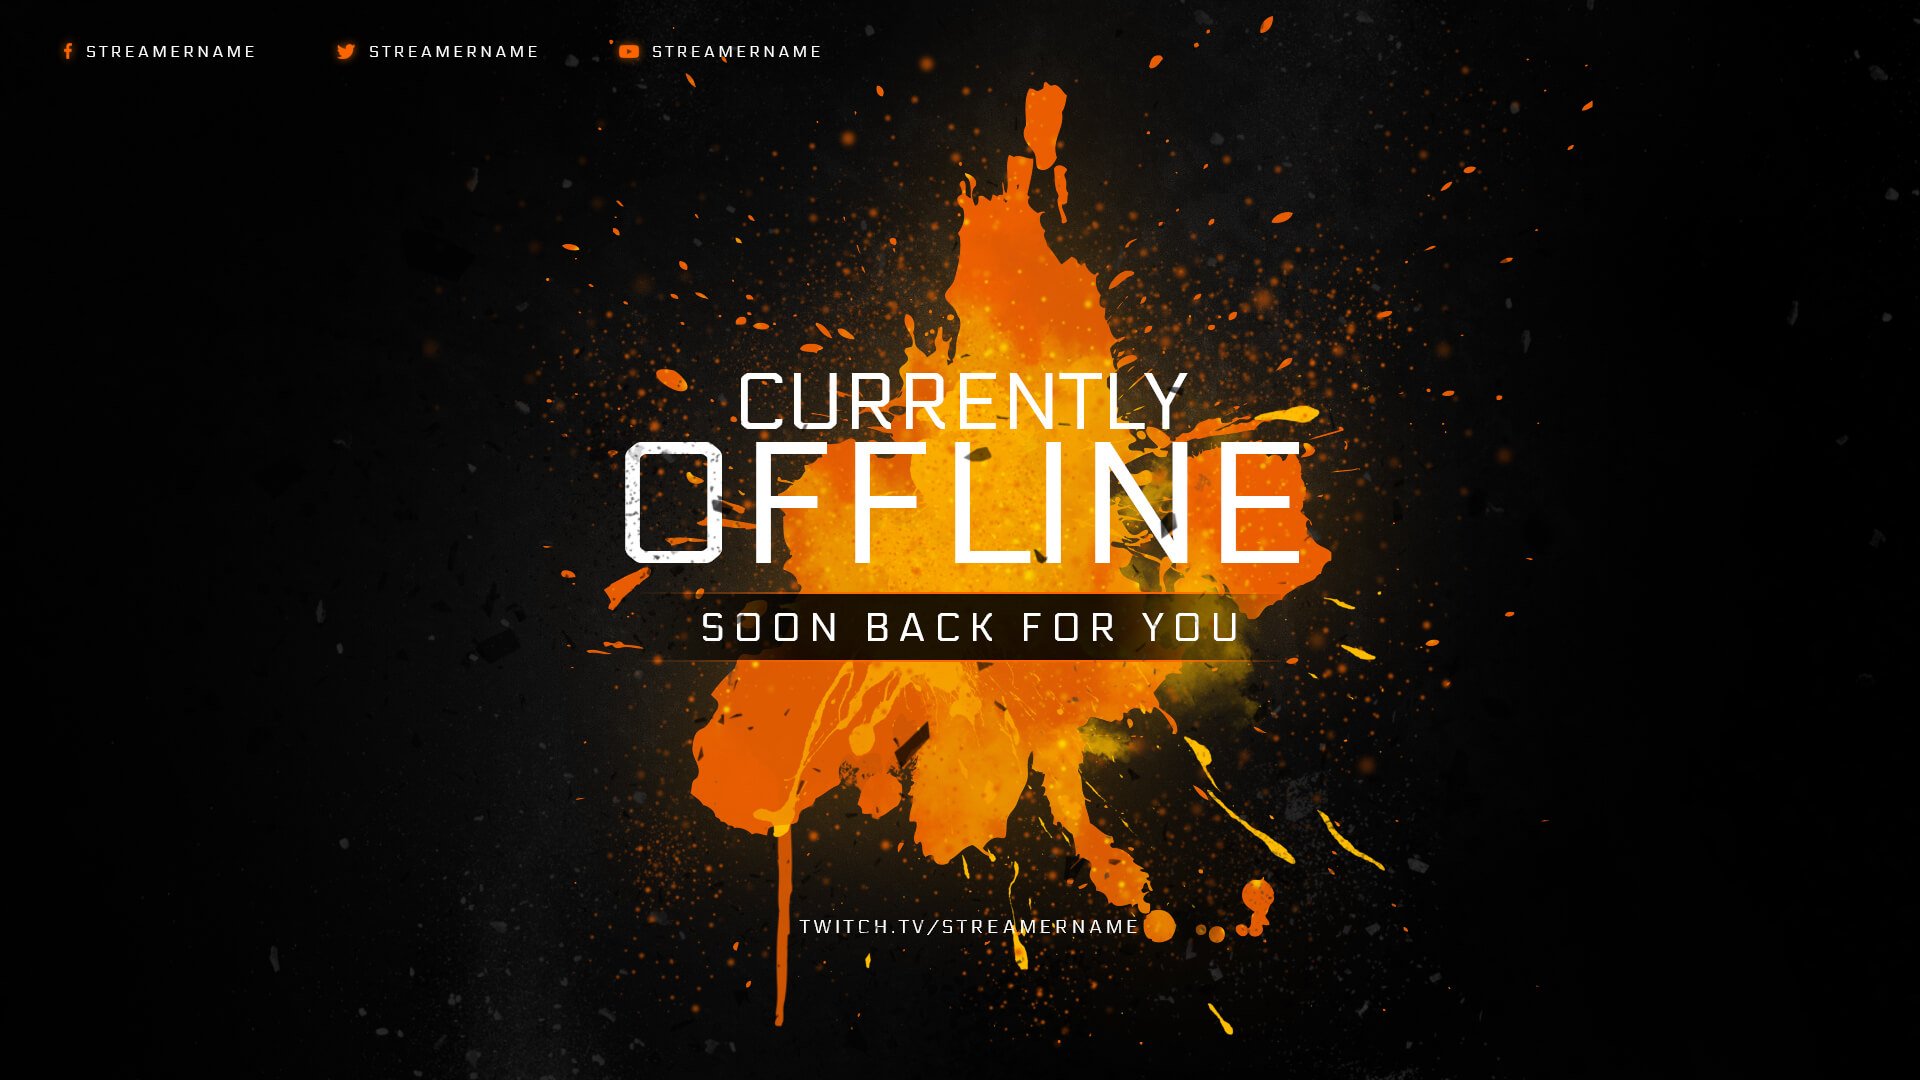 12 of The Best Twitch Offline Banner Templates